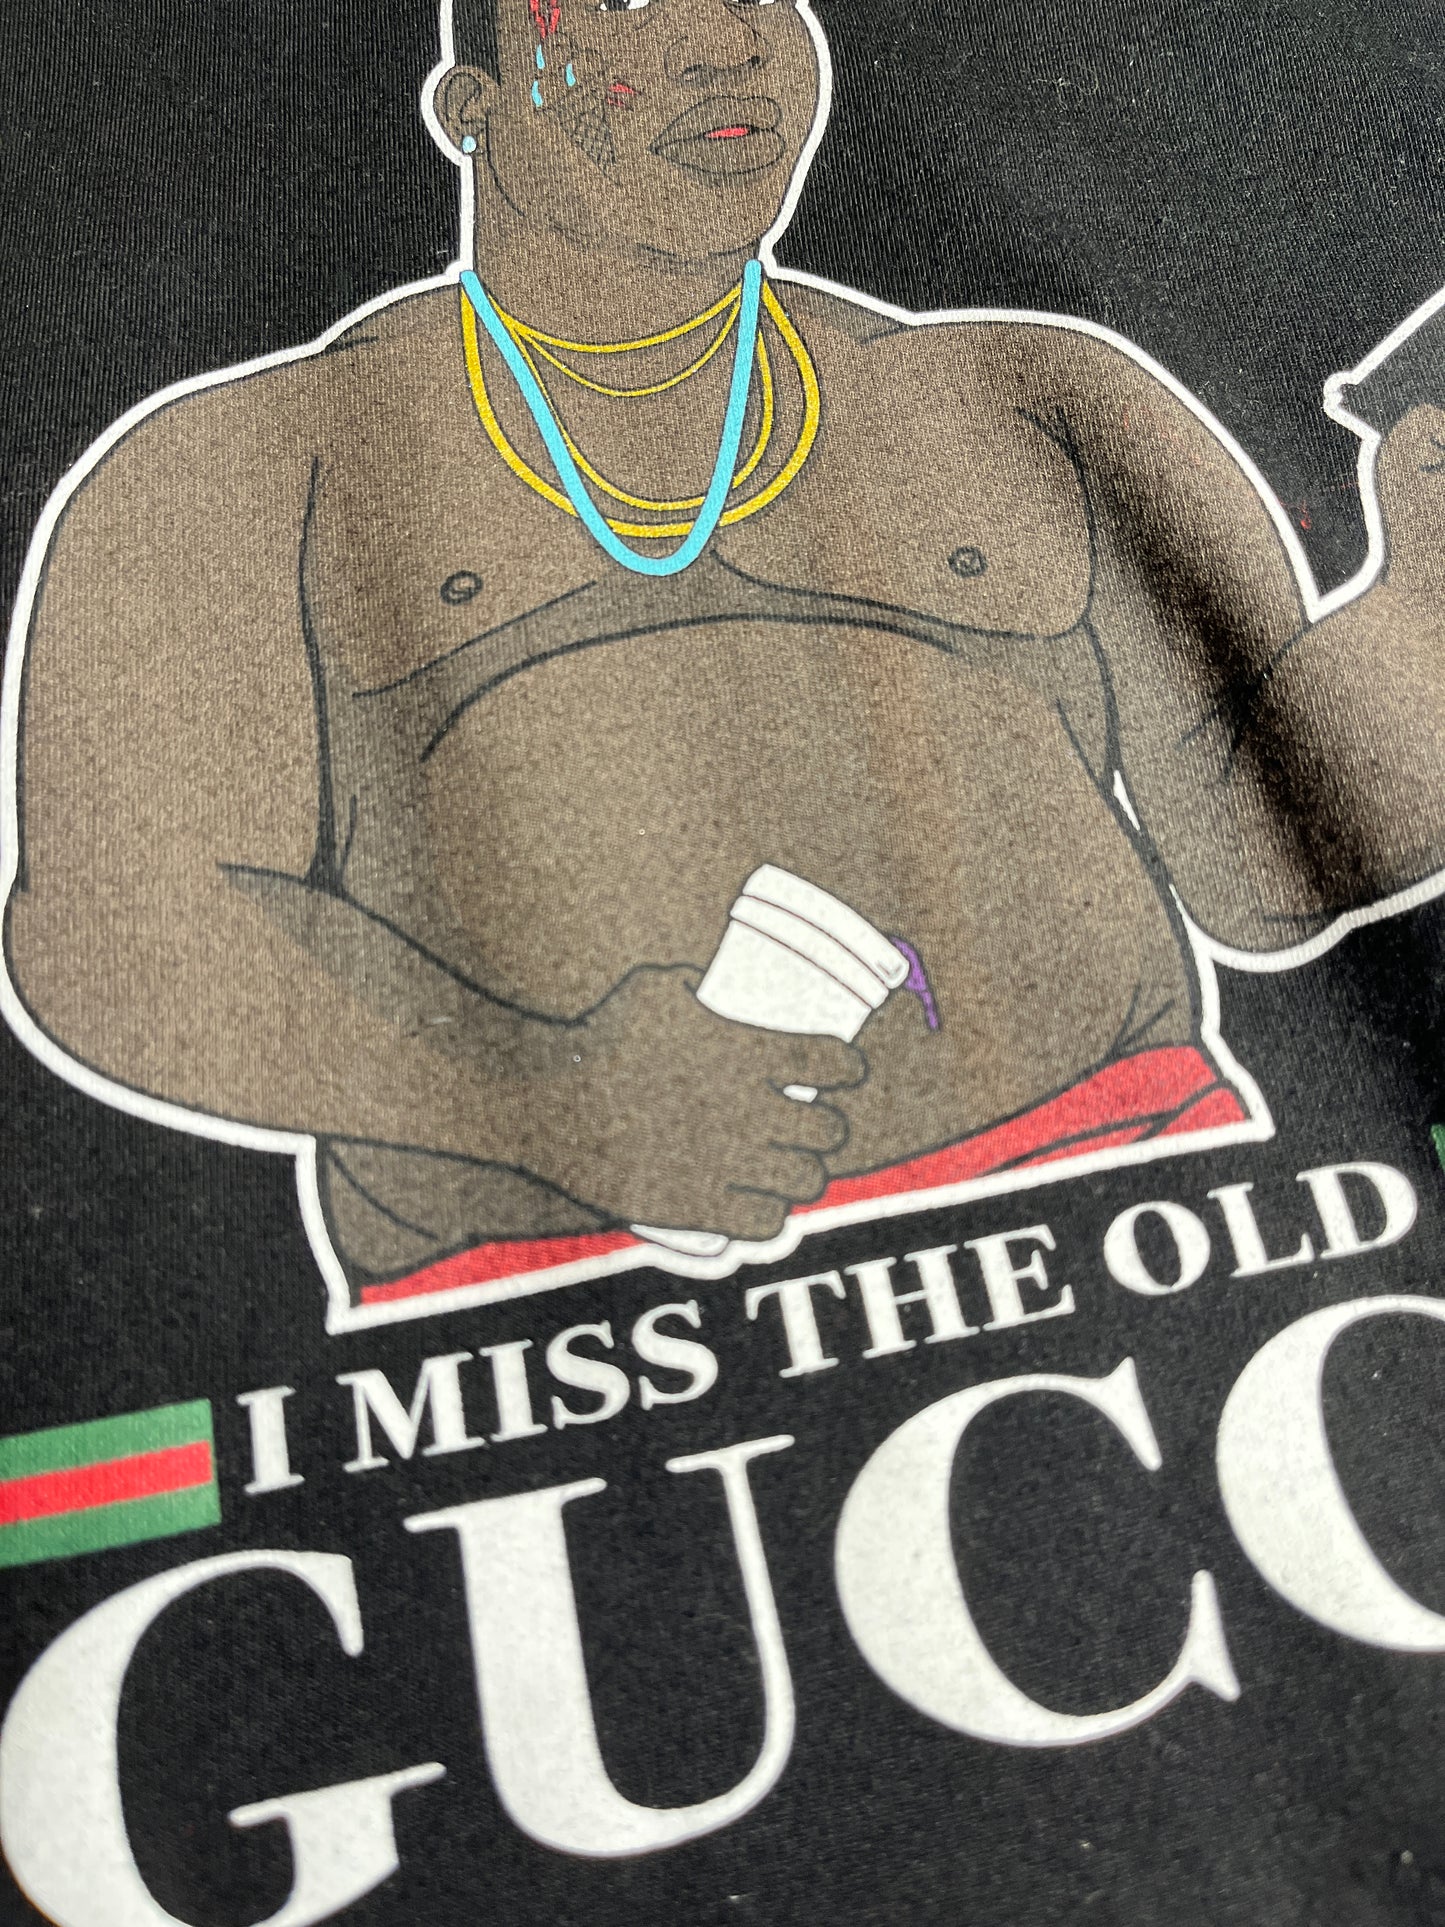 Vintage I Miss The Old Gucci T-Shirt Gucci Mane